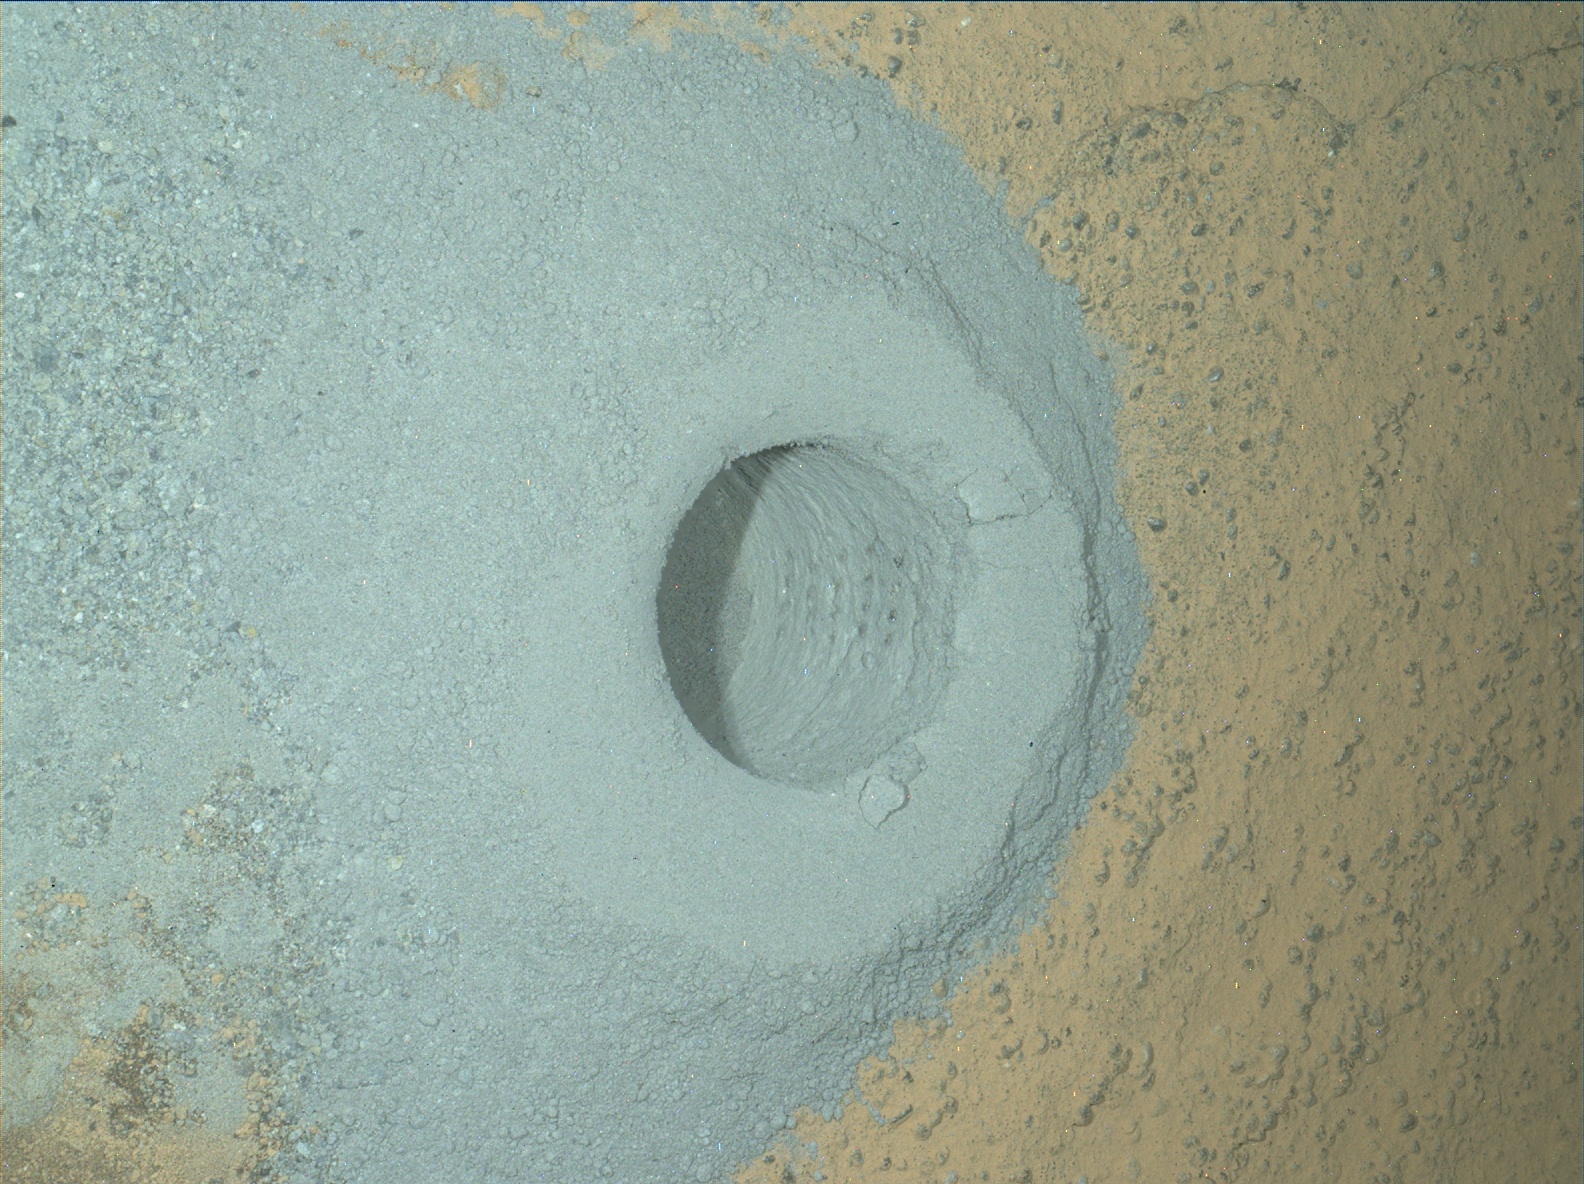 Nasa's Mars rover Curiosity acquired this image using its Mars Hand Lens Imager (MAHLI) on Sol 1356